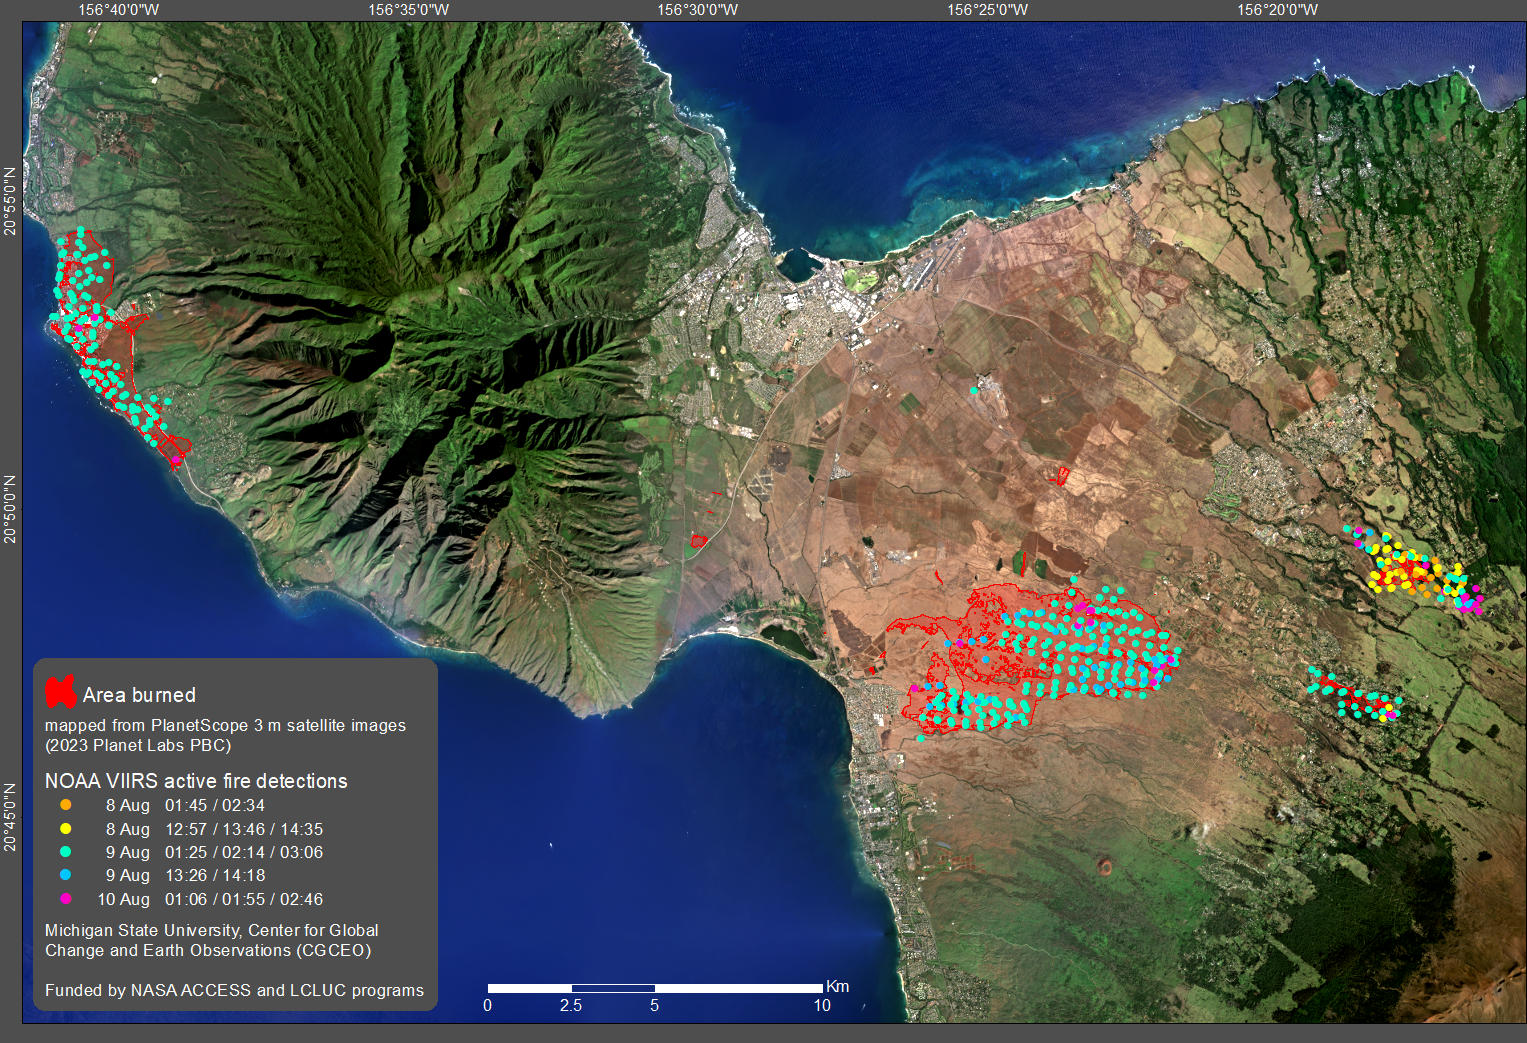 Active fire detections in Maui.